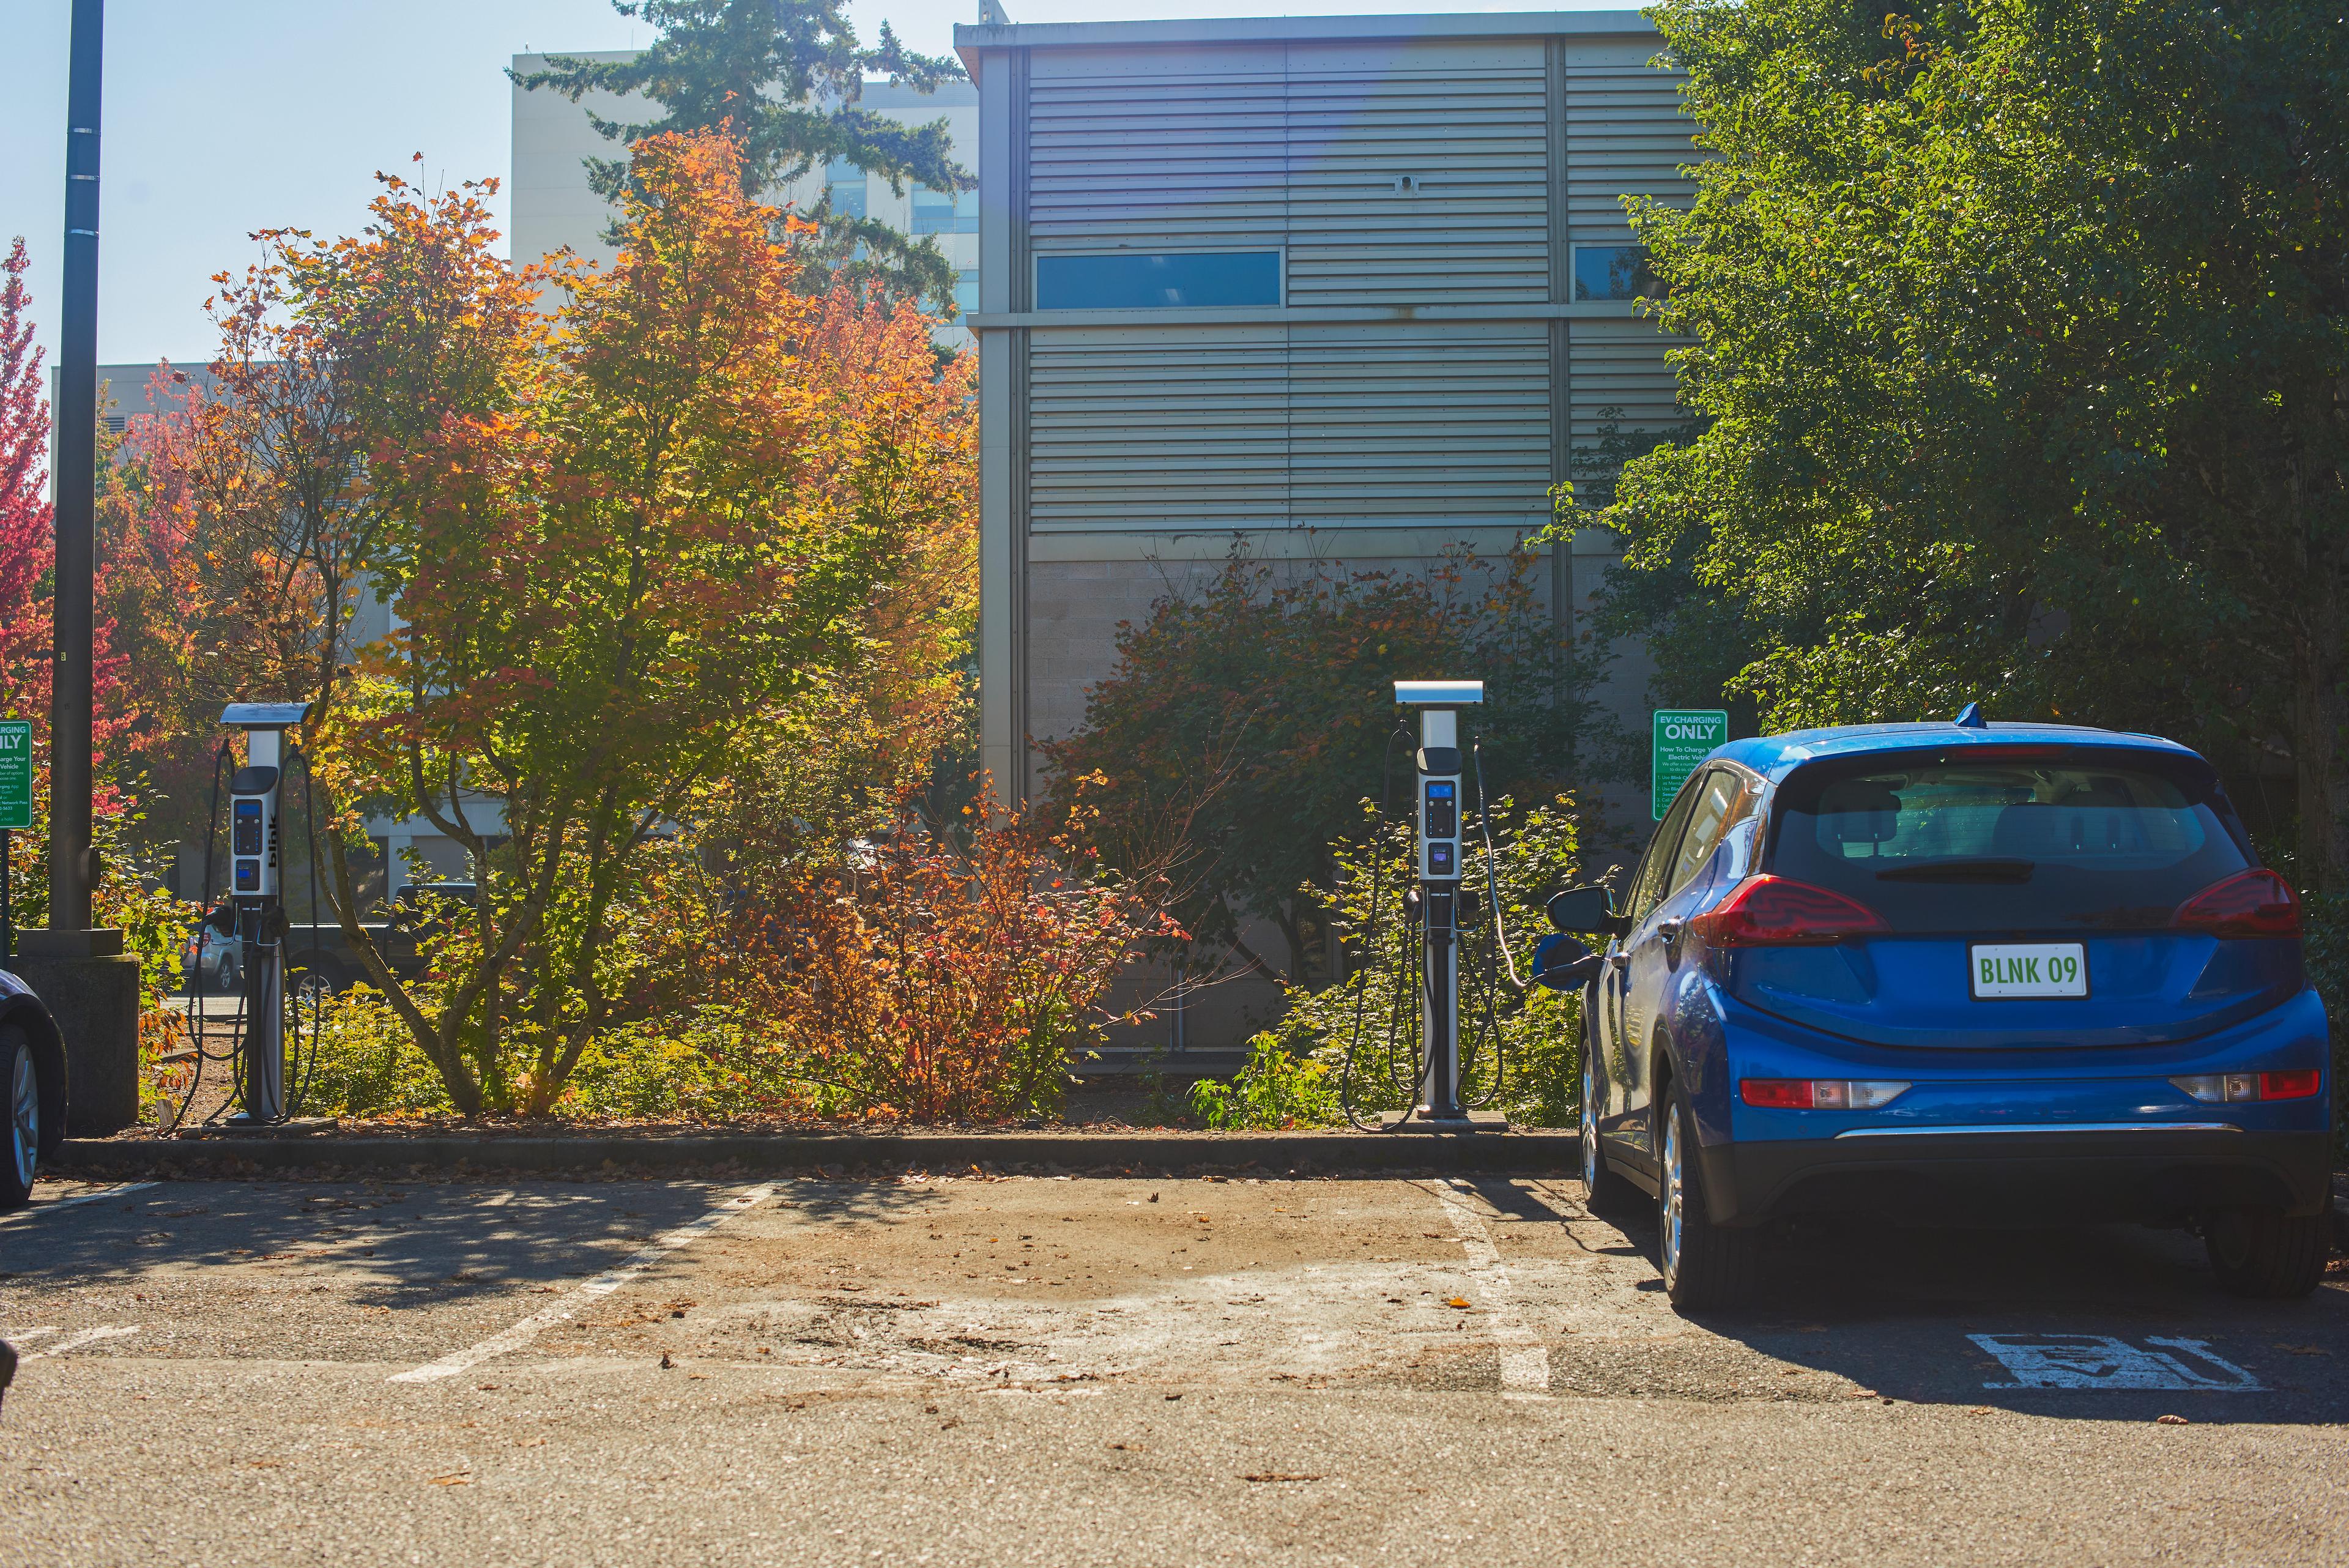 What Parking Facilities Should Know About Installing EV Charging Stations